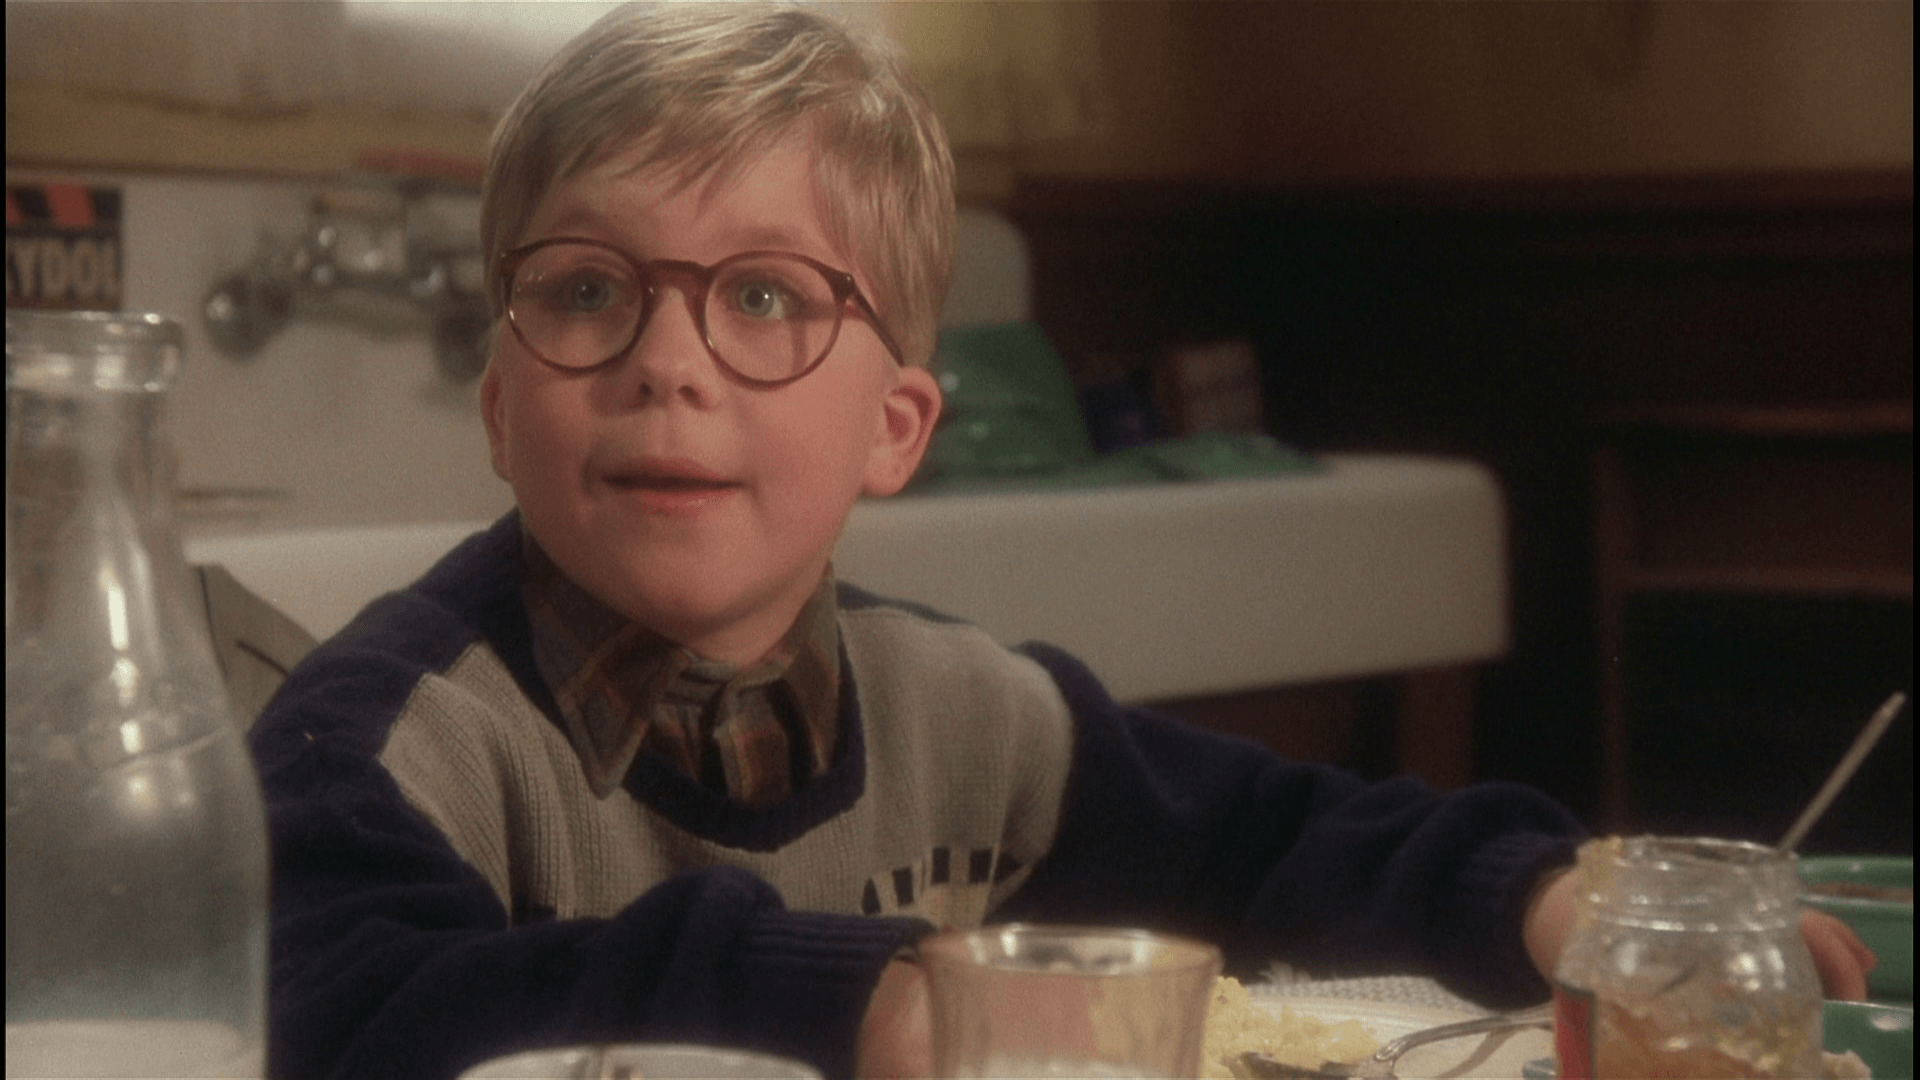 A Christmas Story Wallpaper Image Photo Picture Background